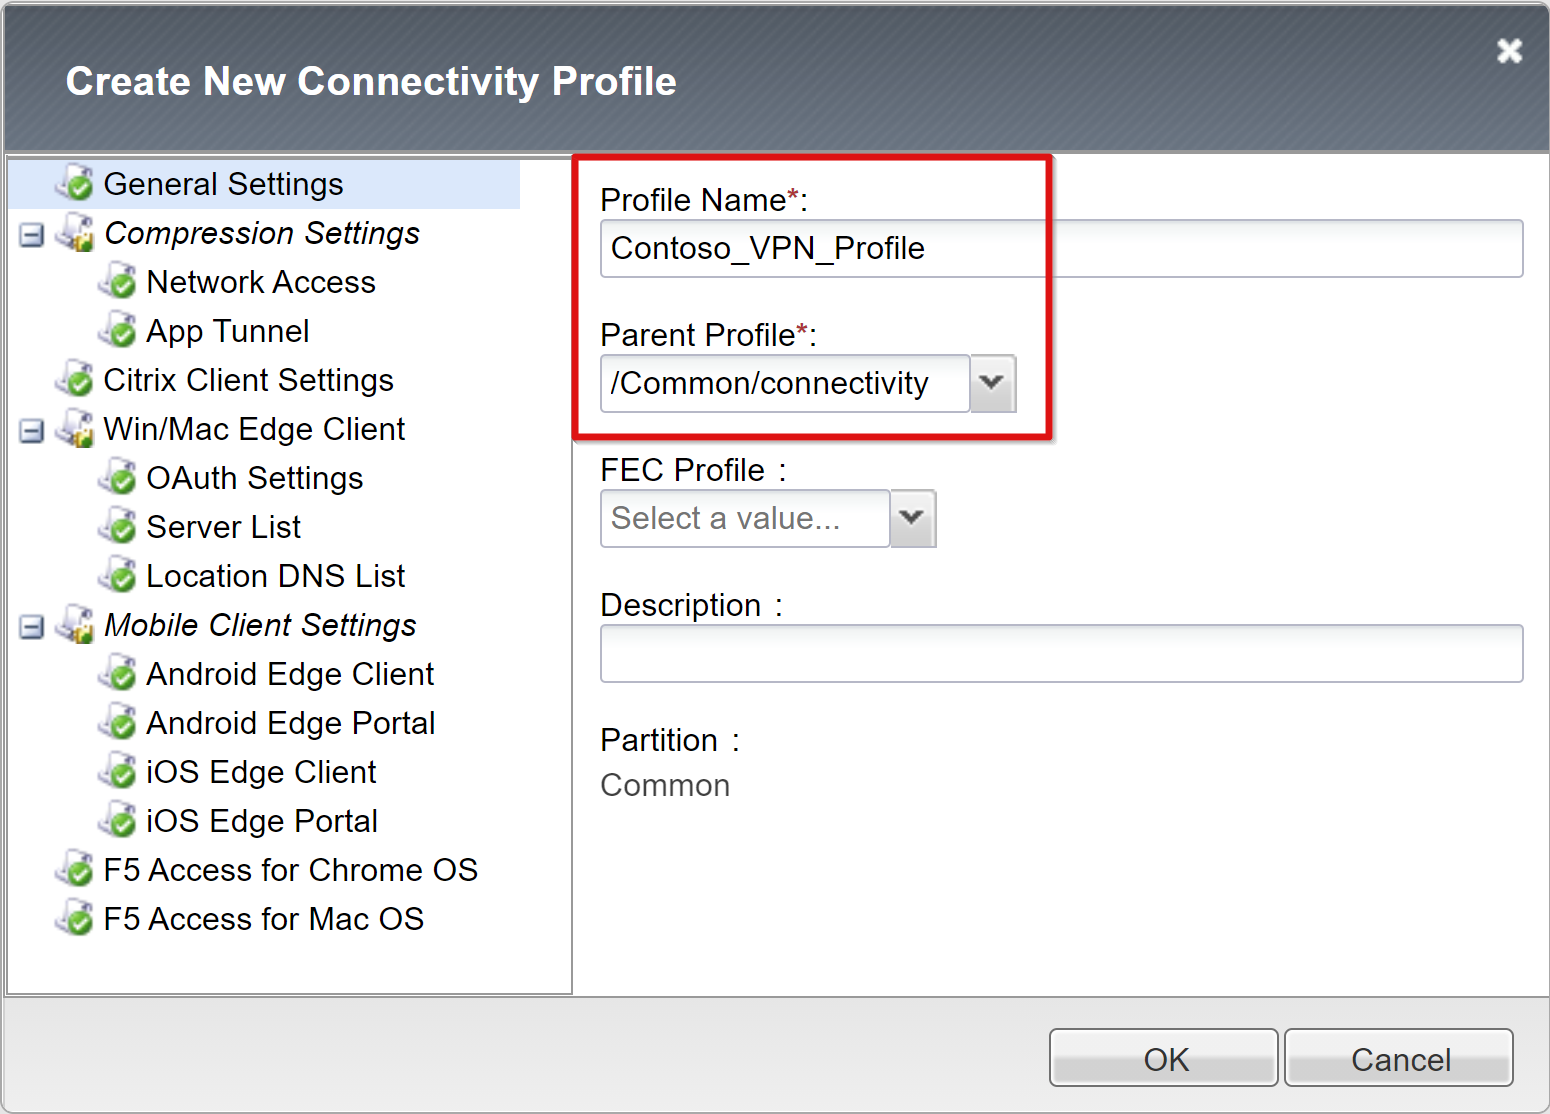 Screenshot of Profile Name and Parent Name entries in Create New Connectivity Profile.